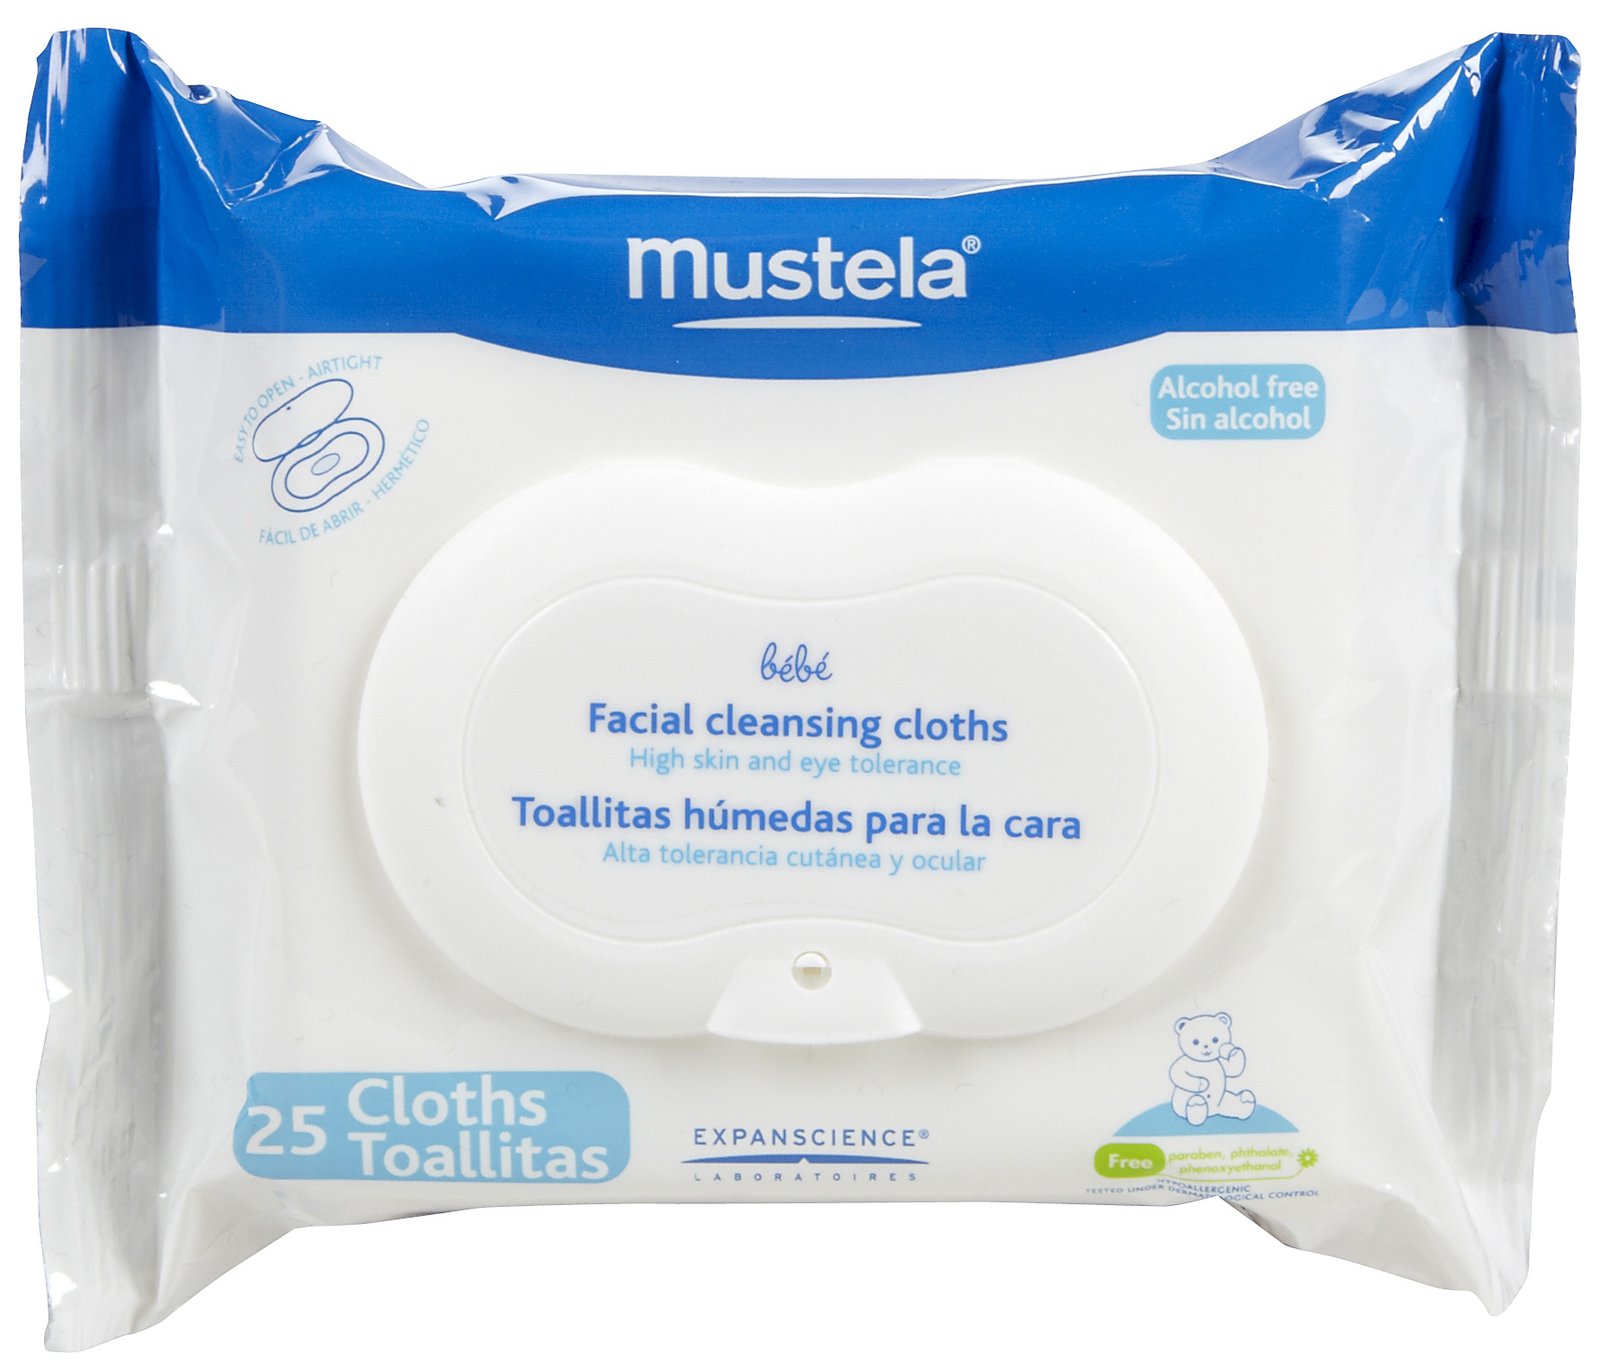 Mustela – not just for babies